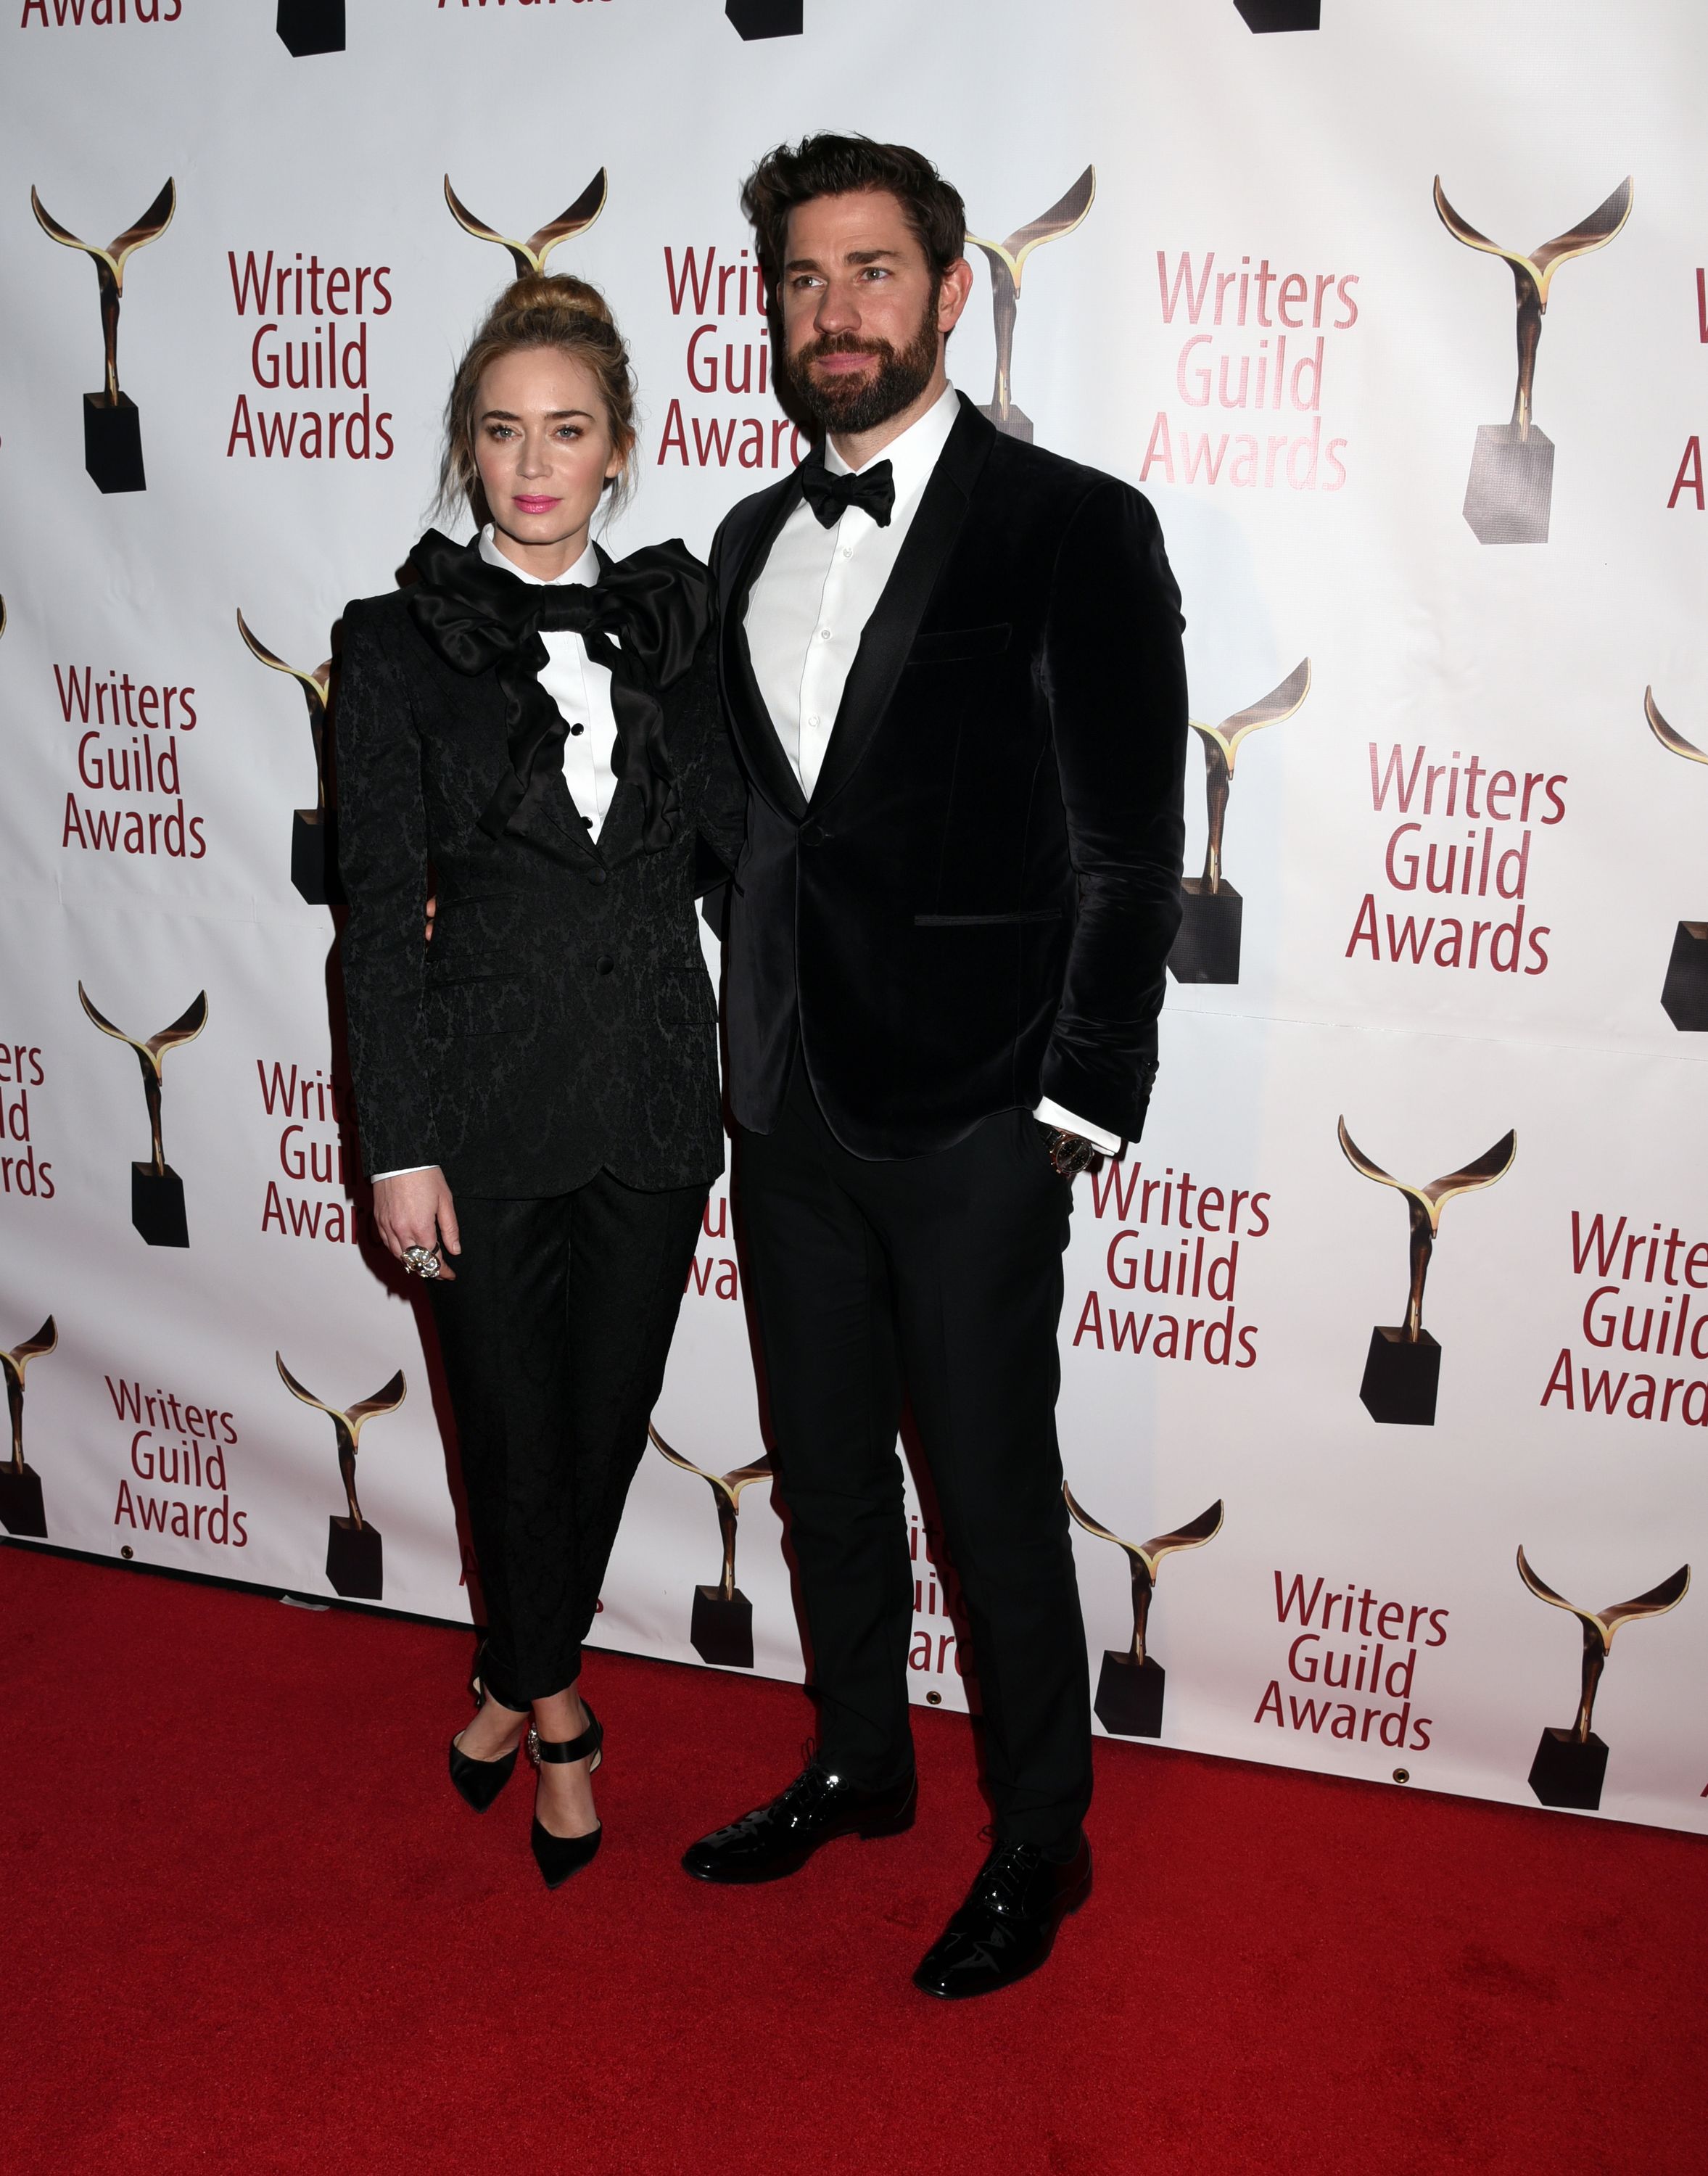 2019-02-17-71st-Annual-Writers-Guild-Awards-138.jpg